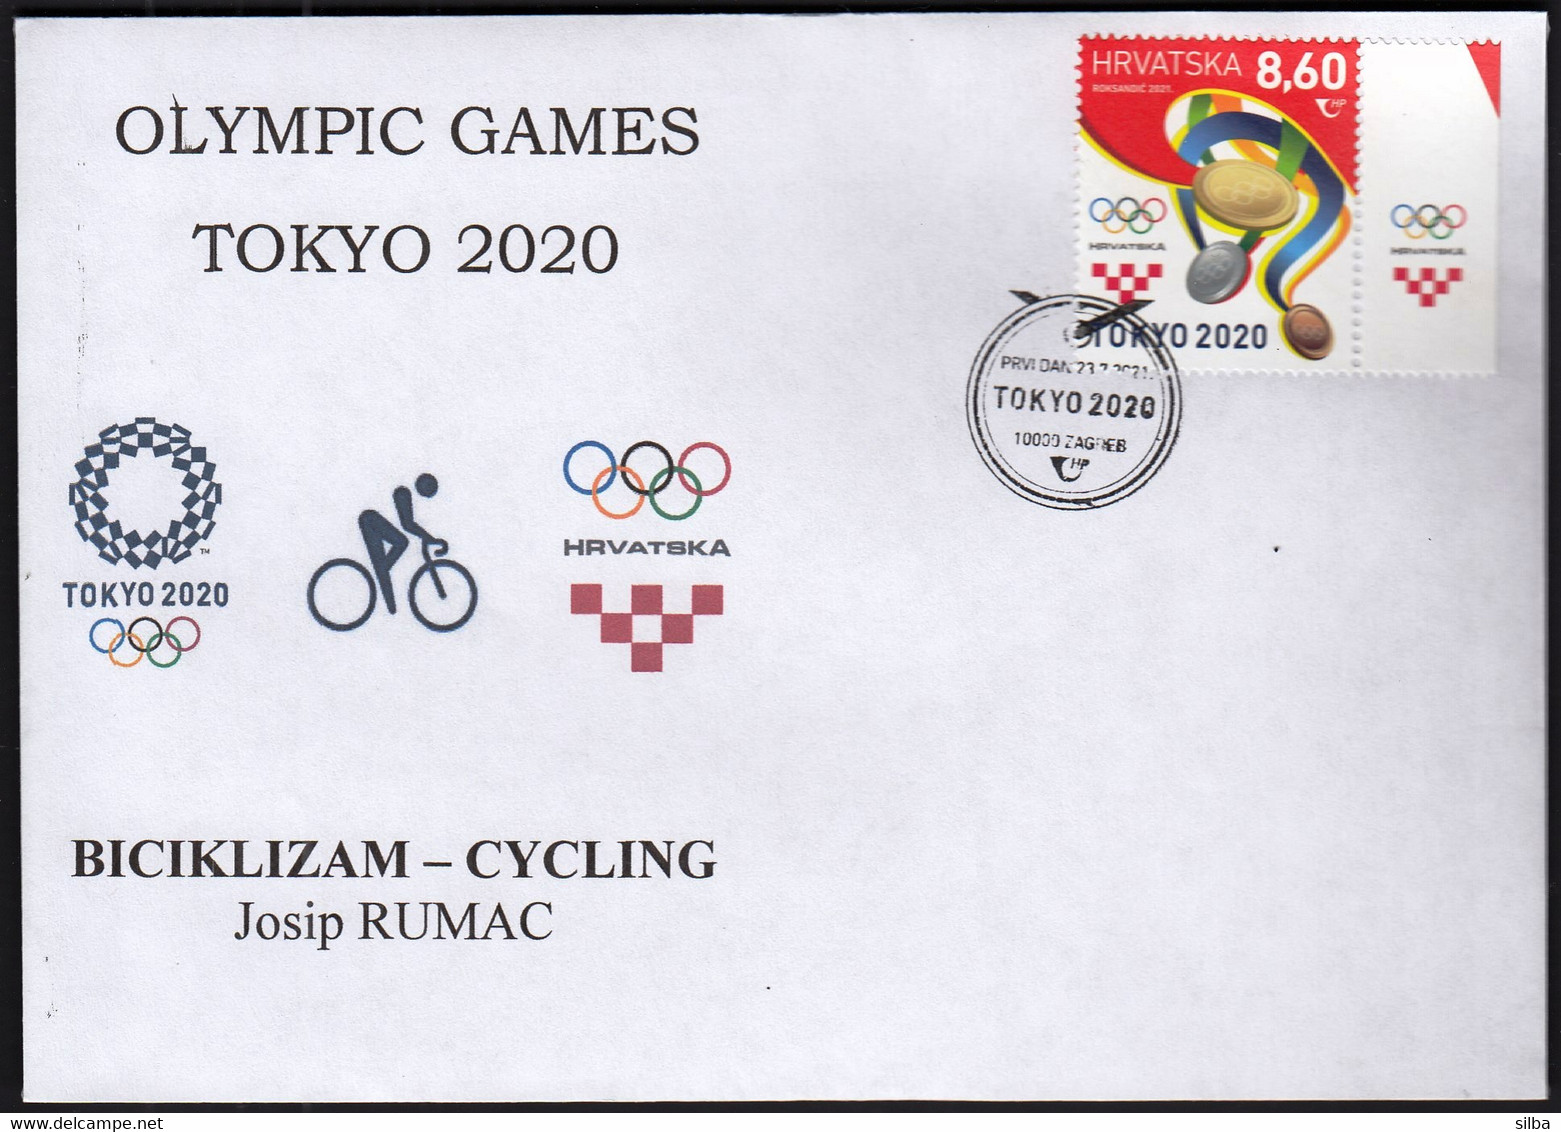 Croatia 2021 / Olympic Games Tokyo 2020 / Cycling / Croatian Athletes / Medals - Sommer 2020: Tokio